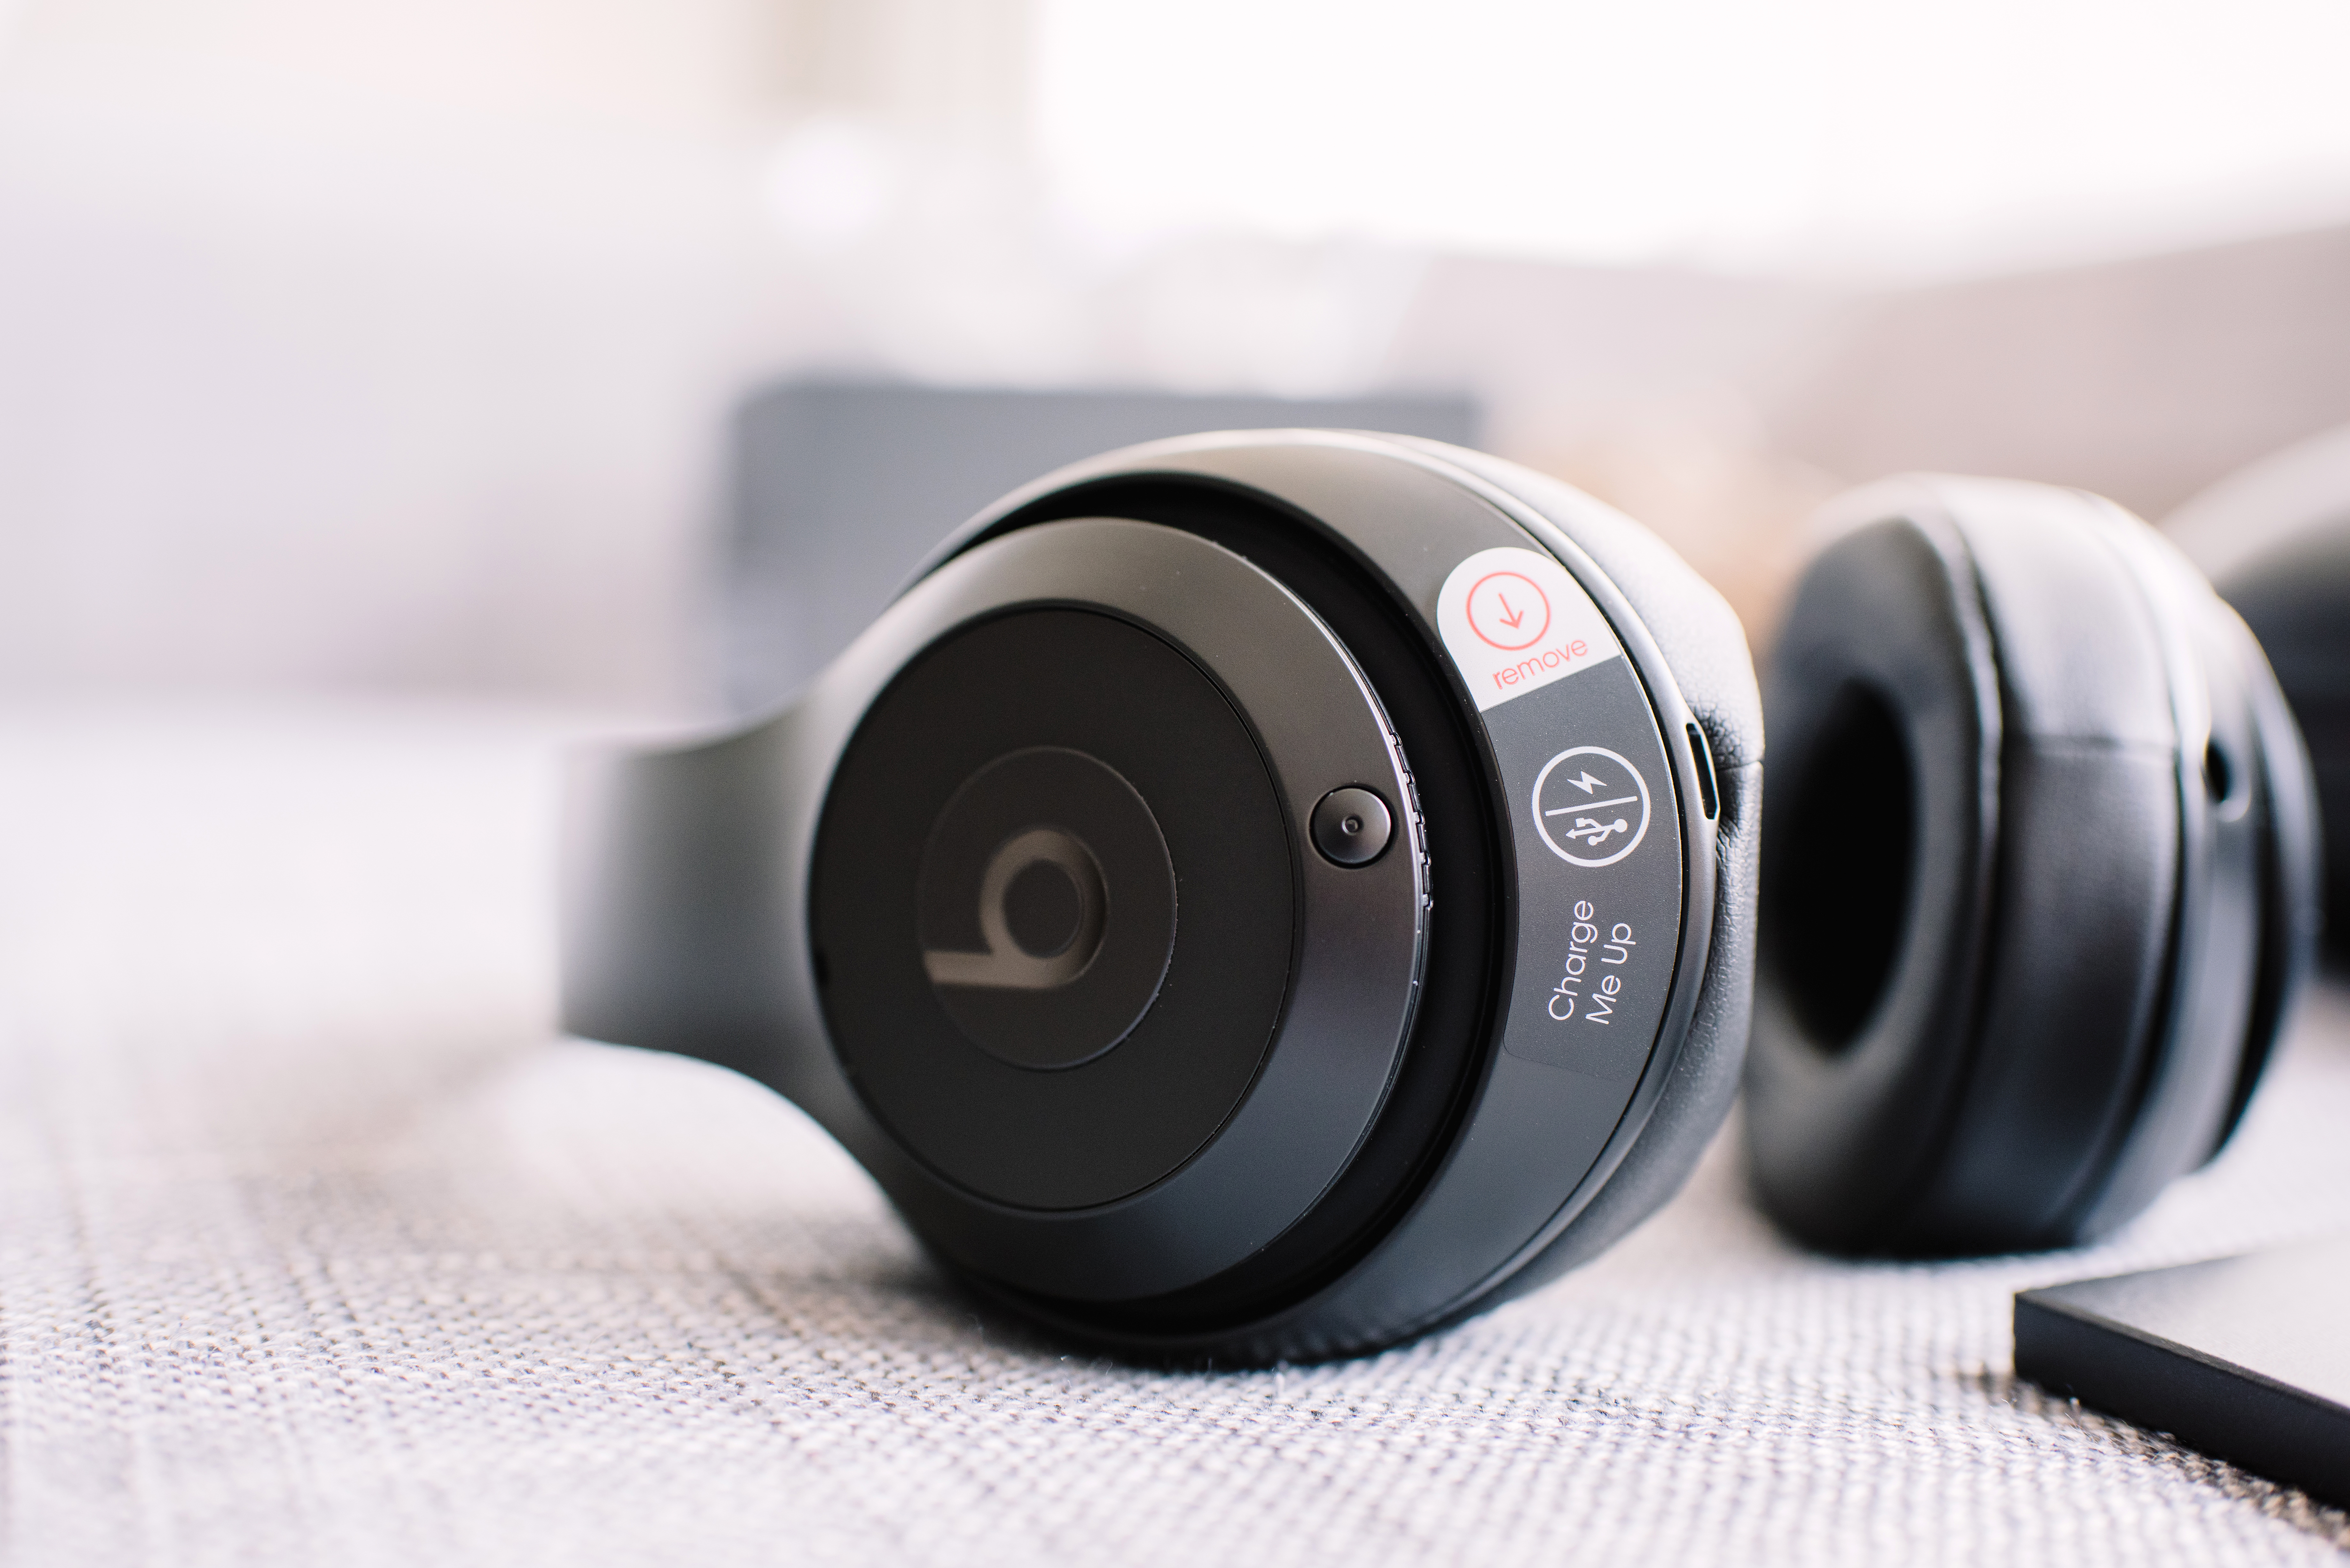 Black Friday deals available now: Beats 